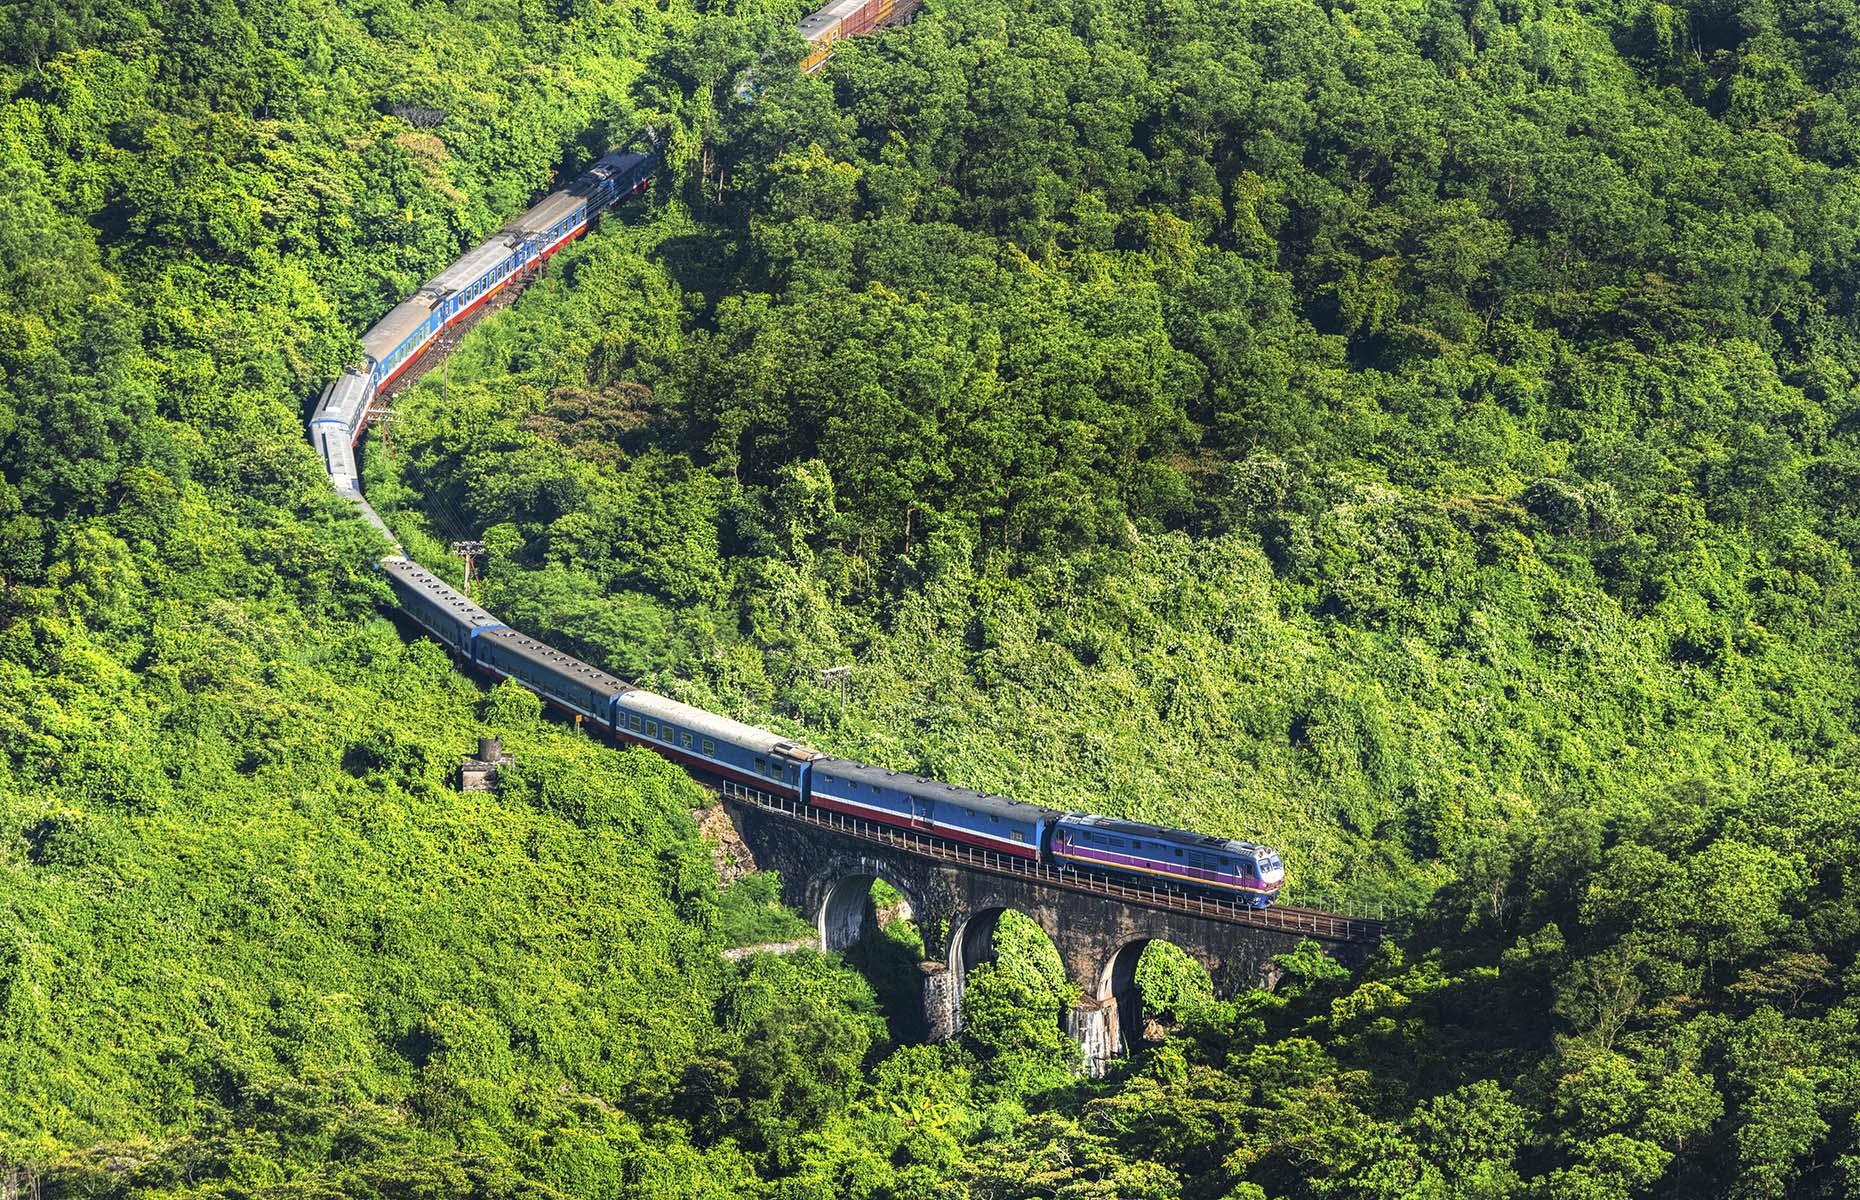 A trip on this train takes in breathtaking Vietnamese landscapes like Hải Vân Pass, Vân Phong Bay and the Annamite Range. Prices for the full, one-way journey between Hanoi and Ho Chi Minh City start from £29 ($40) for a soft seat while soft sleeper lower berths with air conditioning start from £46 ($62).